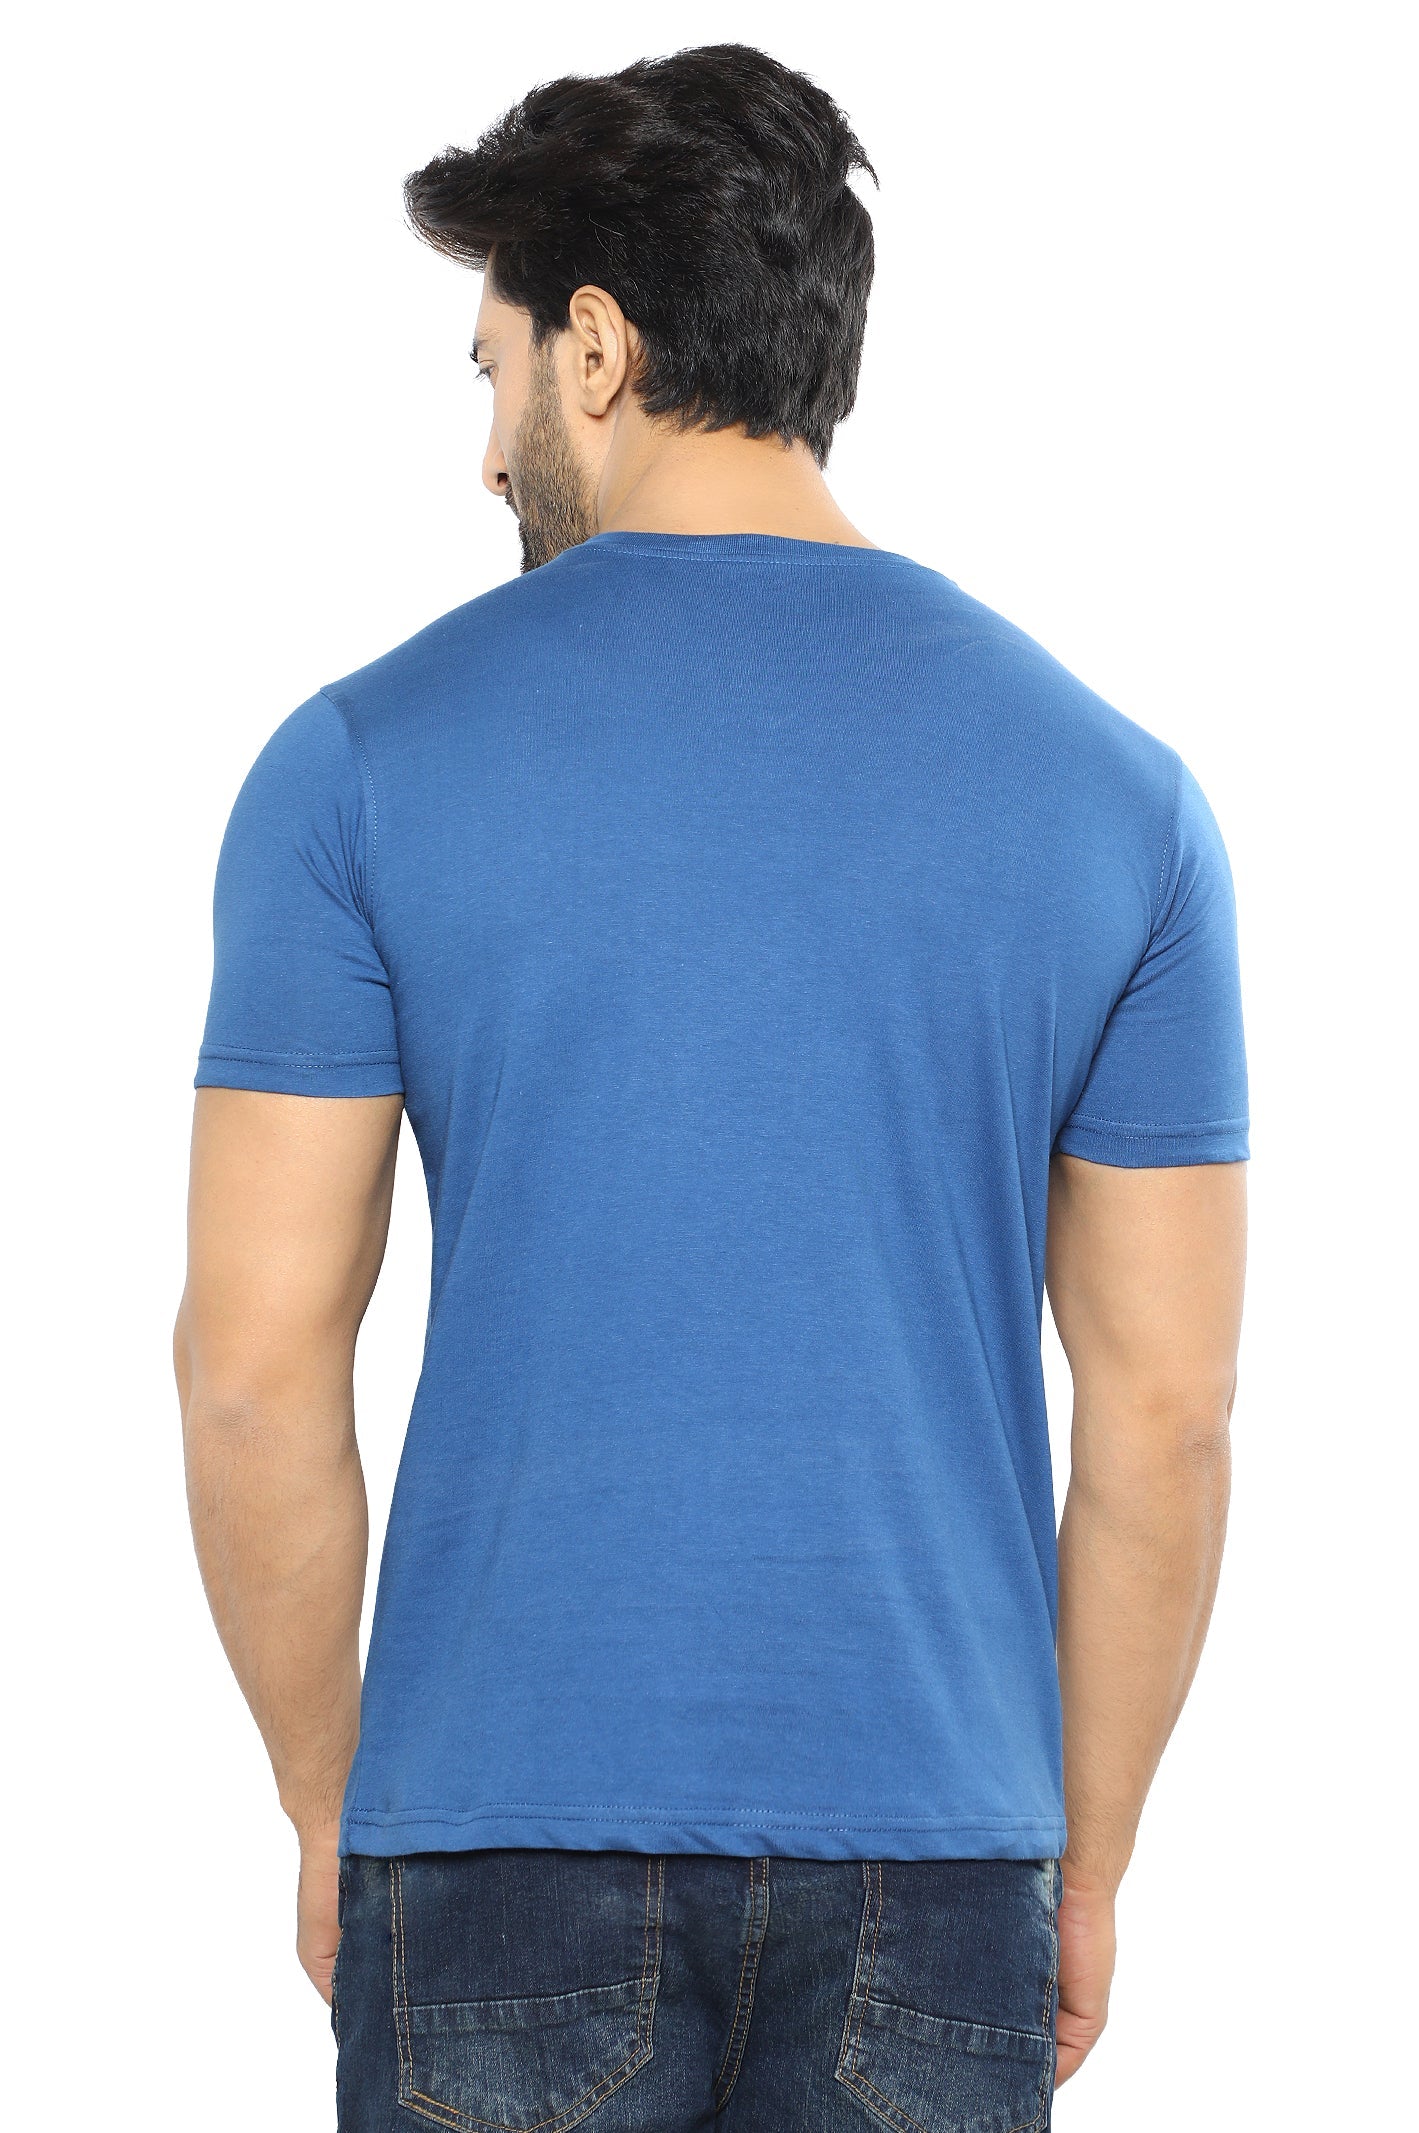 Diners Men's Round Neck T-Shirt SKU: NA857-N-BLUE - Diners